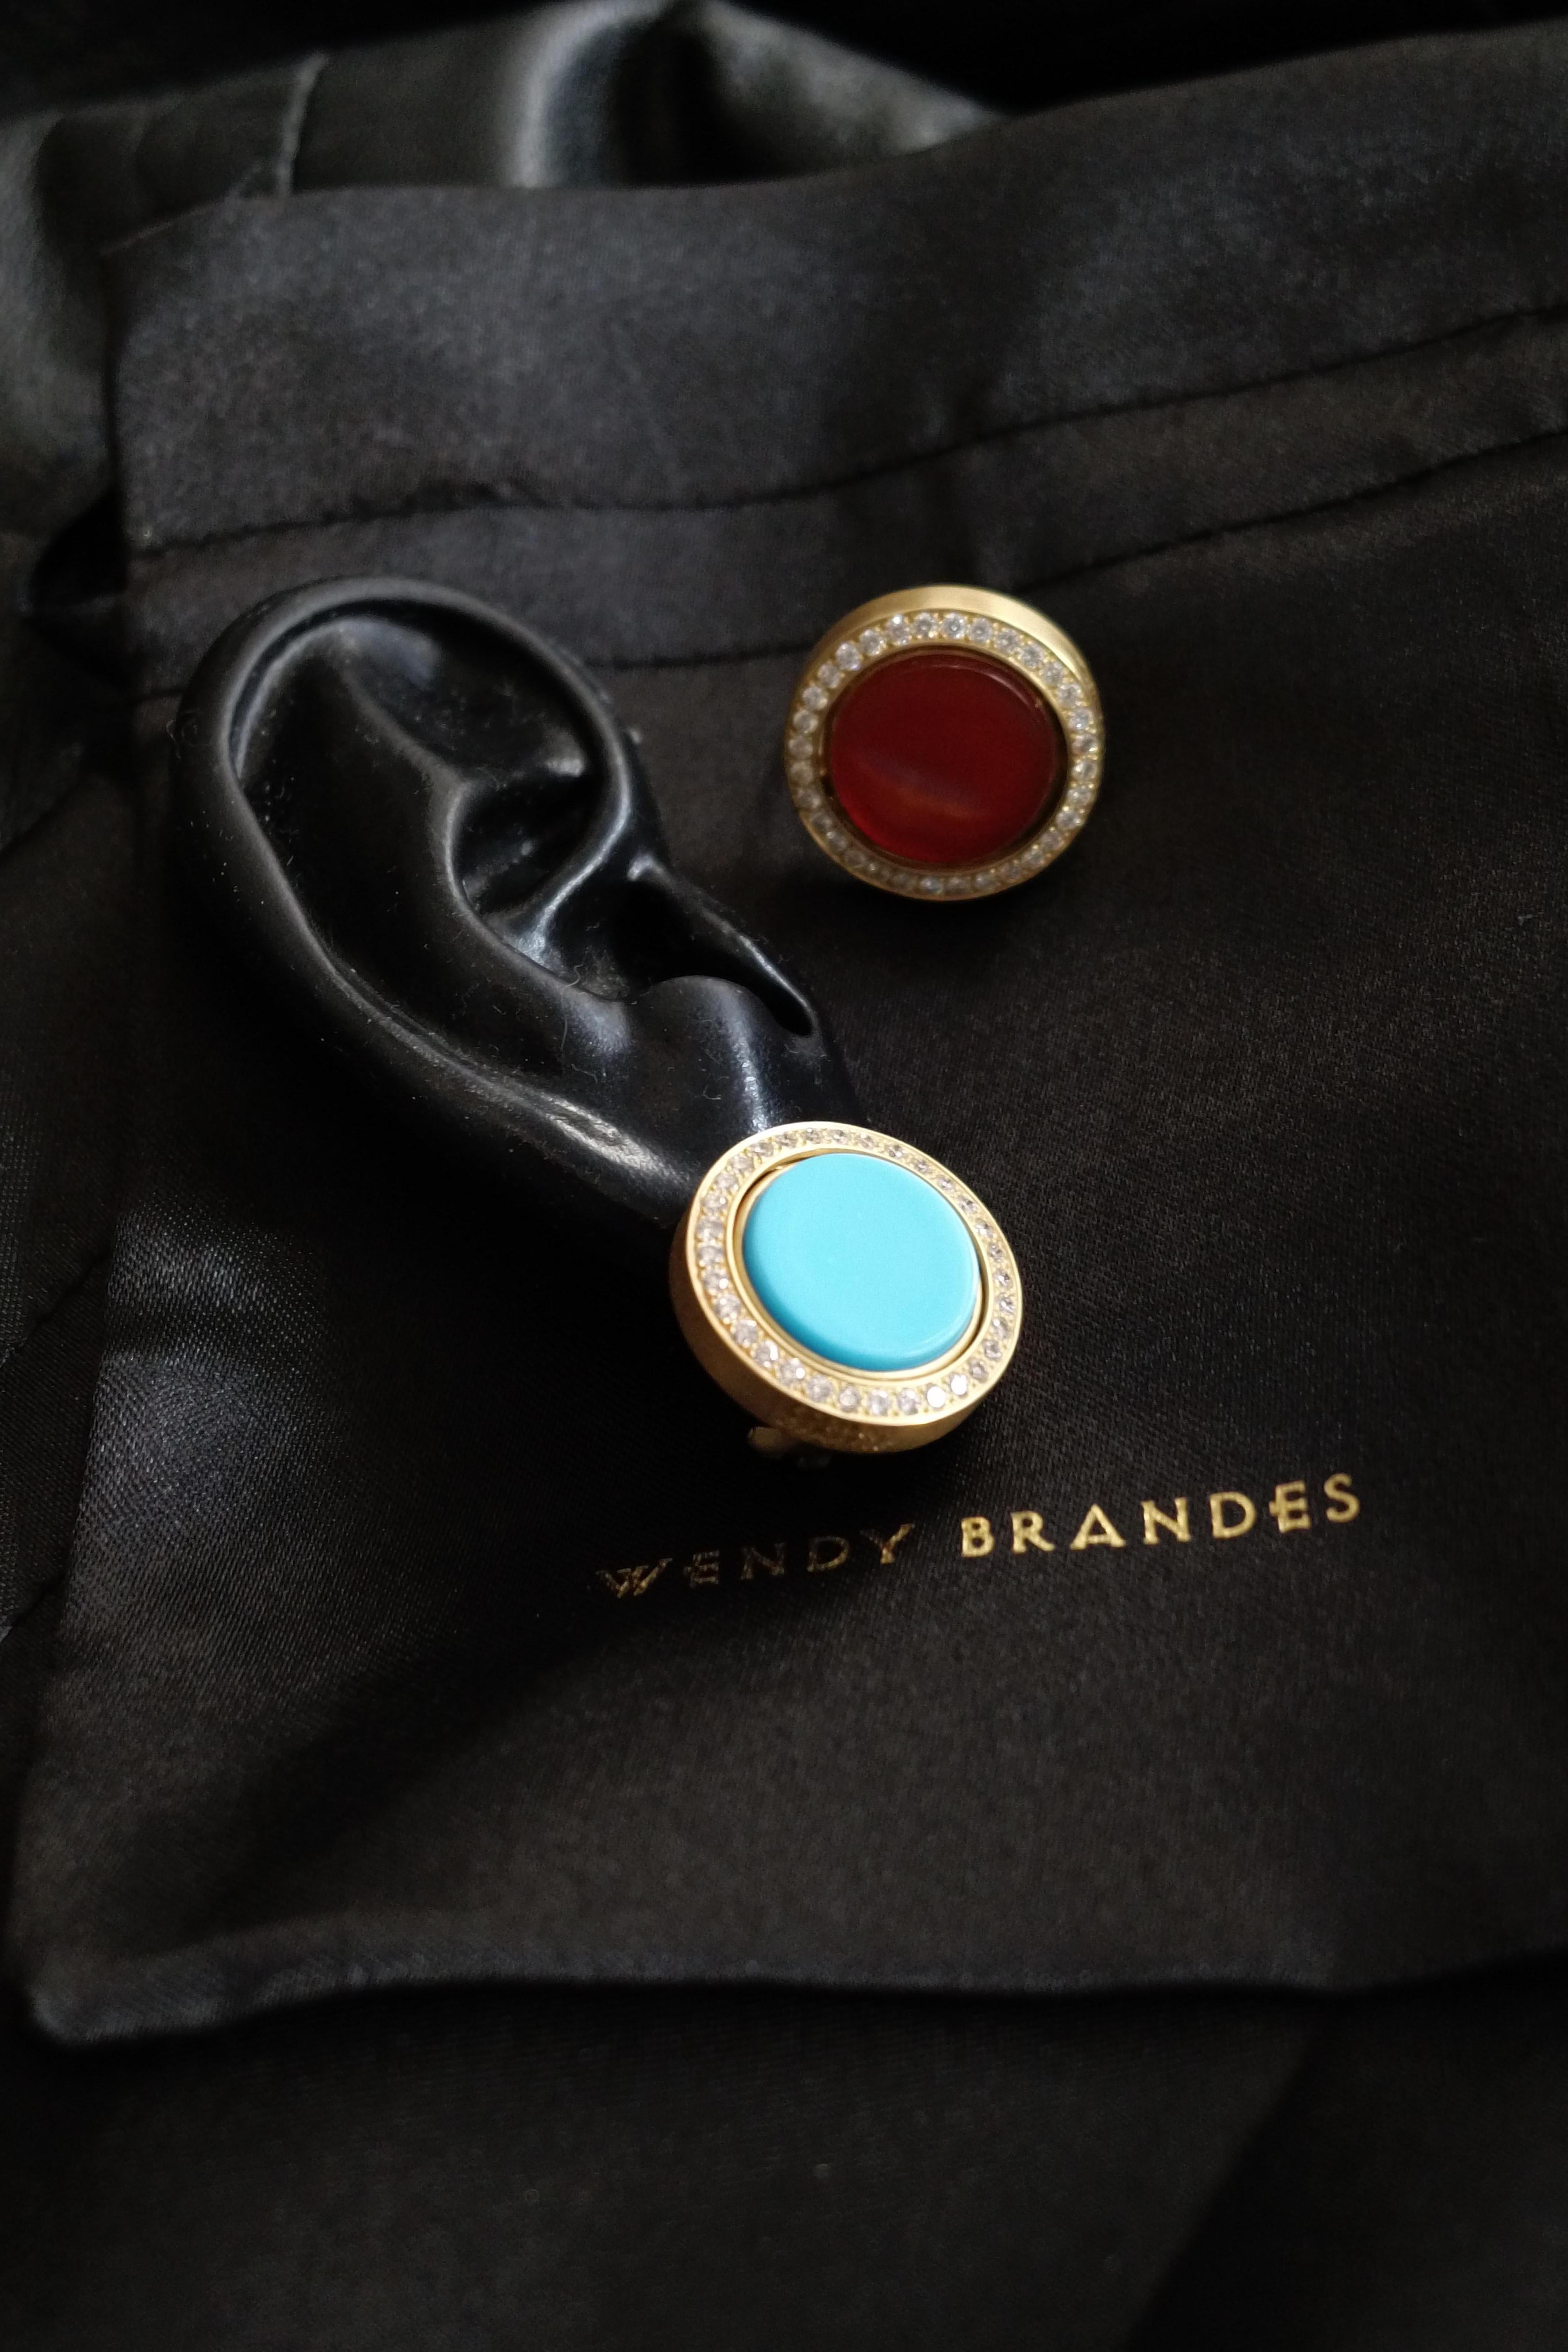 Cabochon Wendy Brandes Turquoise, Carnelian, and Diamond Flip Earrings in 18K Yellow Gold